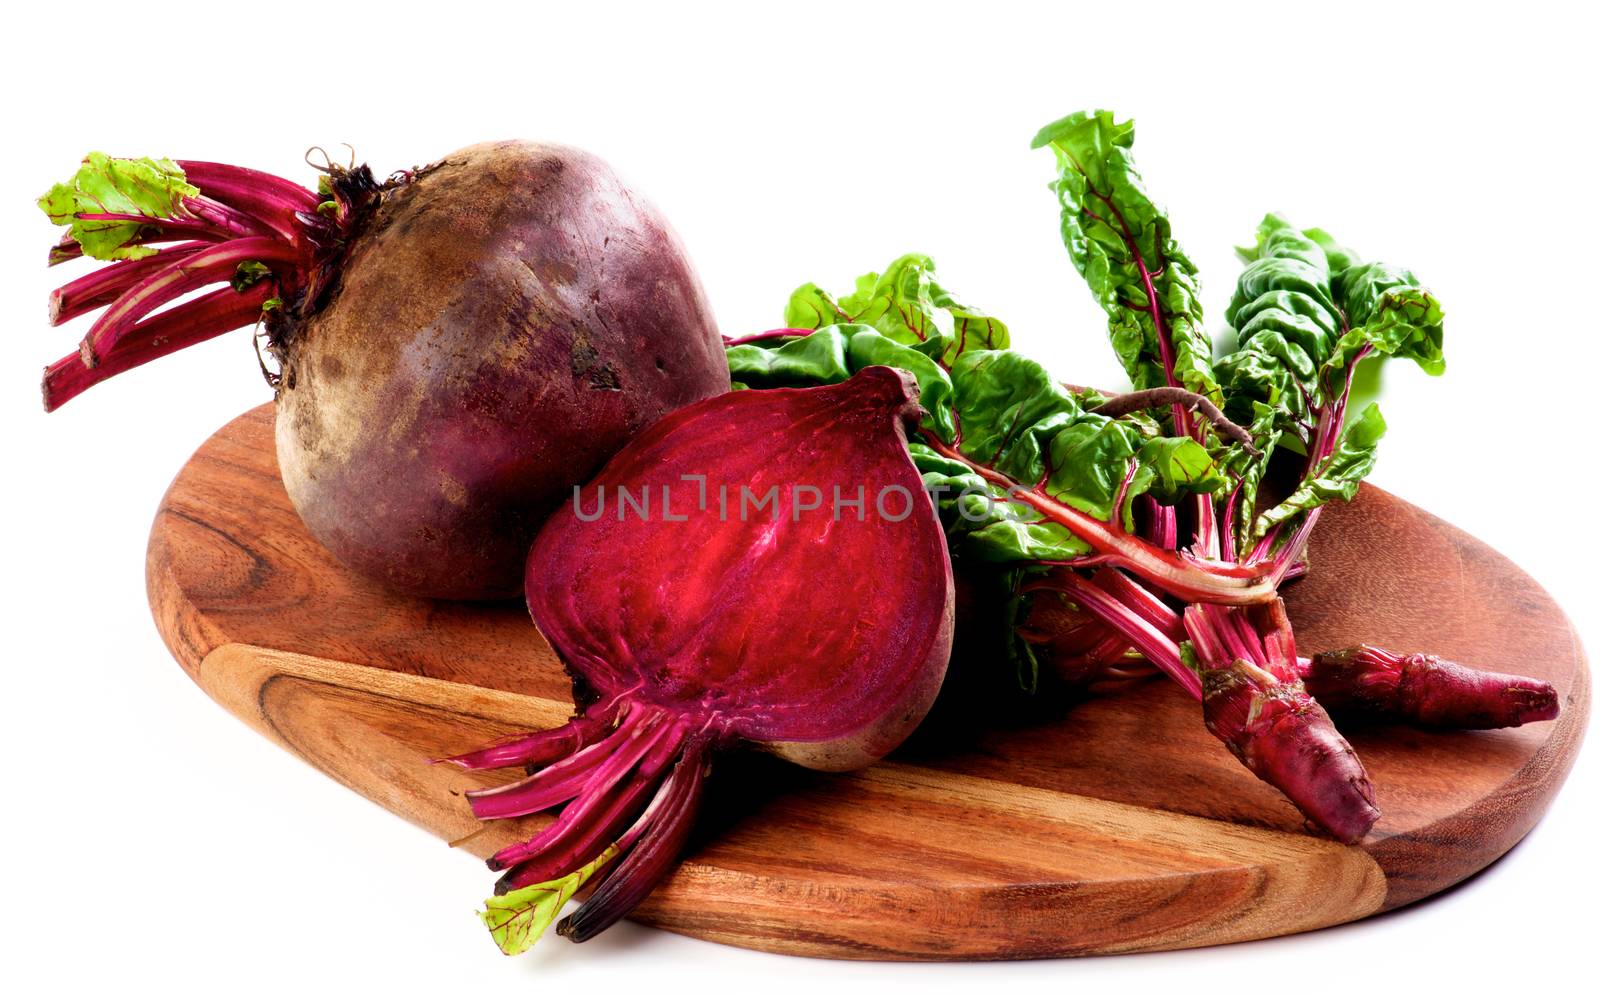 Arrangement of Full Body, Half and Young Sprouts of  Fresh Raw Organic Beet Roots with Green Beet Tops on Wooden Cutting Board isolated on White background